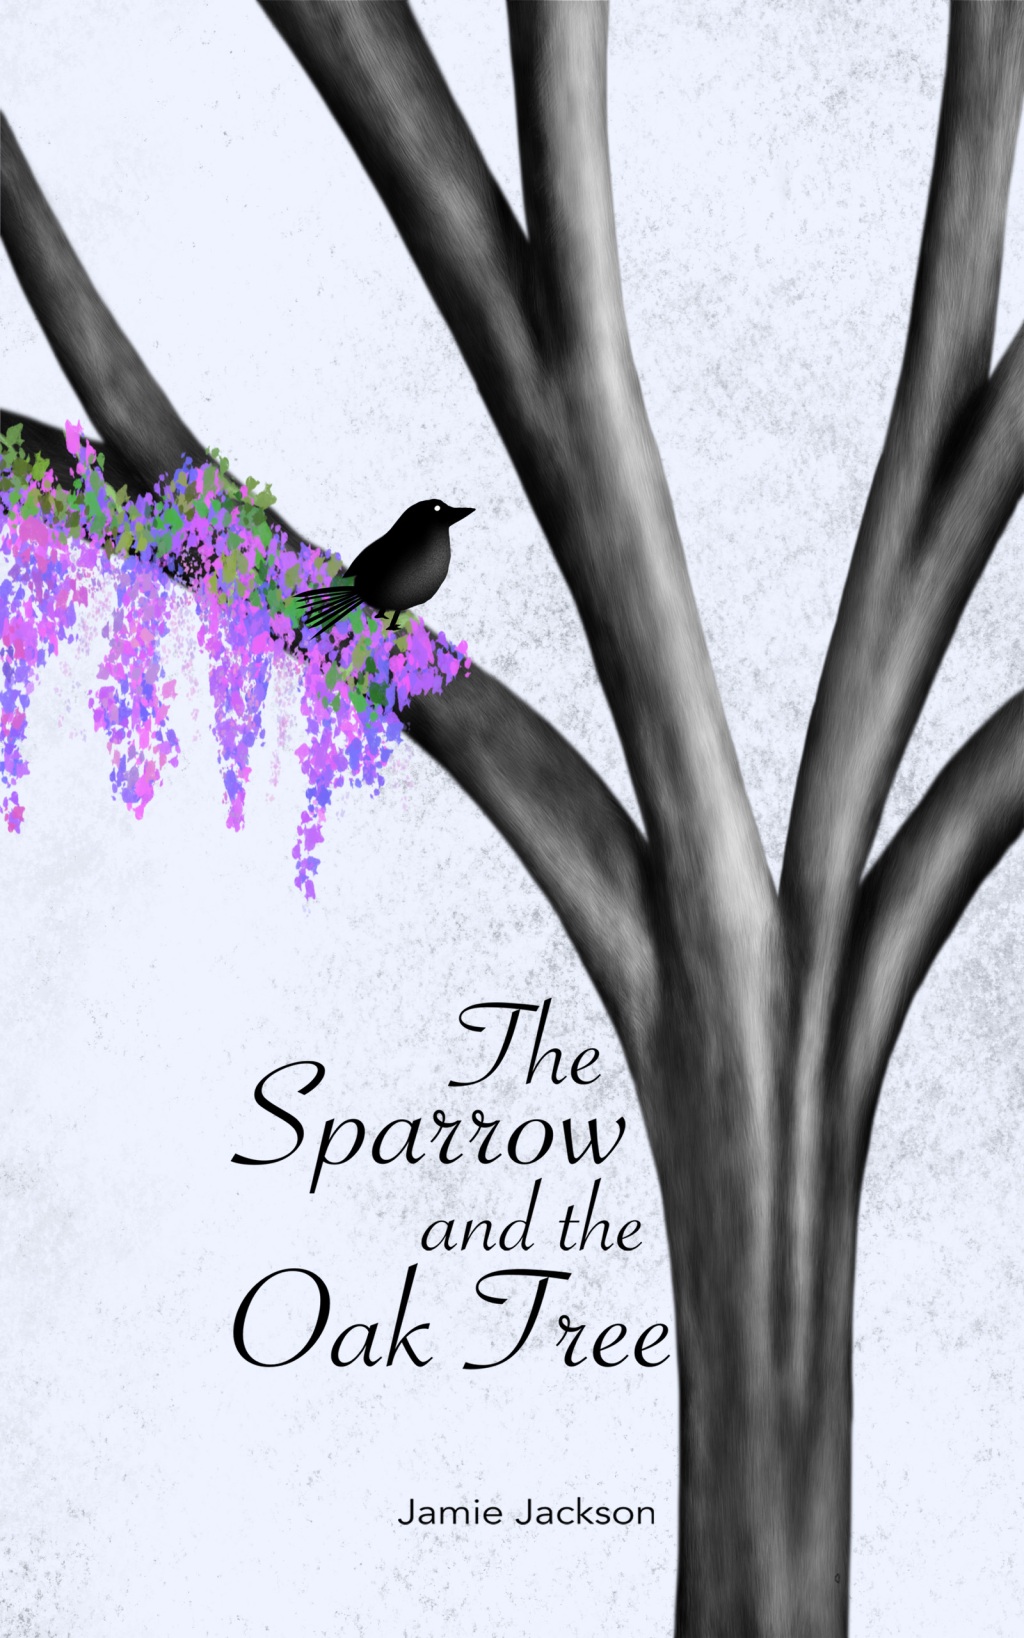 The Sparrow and the Oak Tree by Jamie Jackson